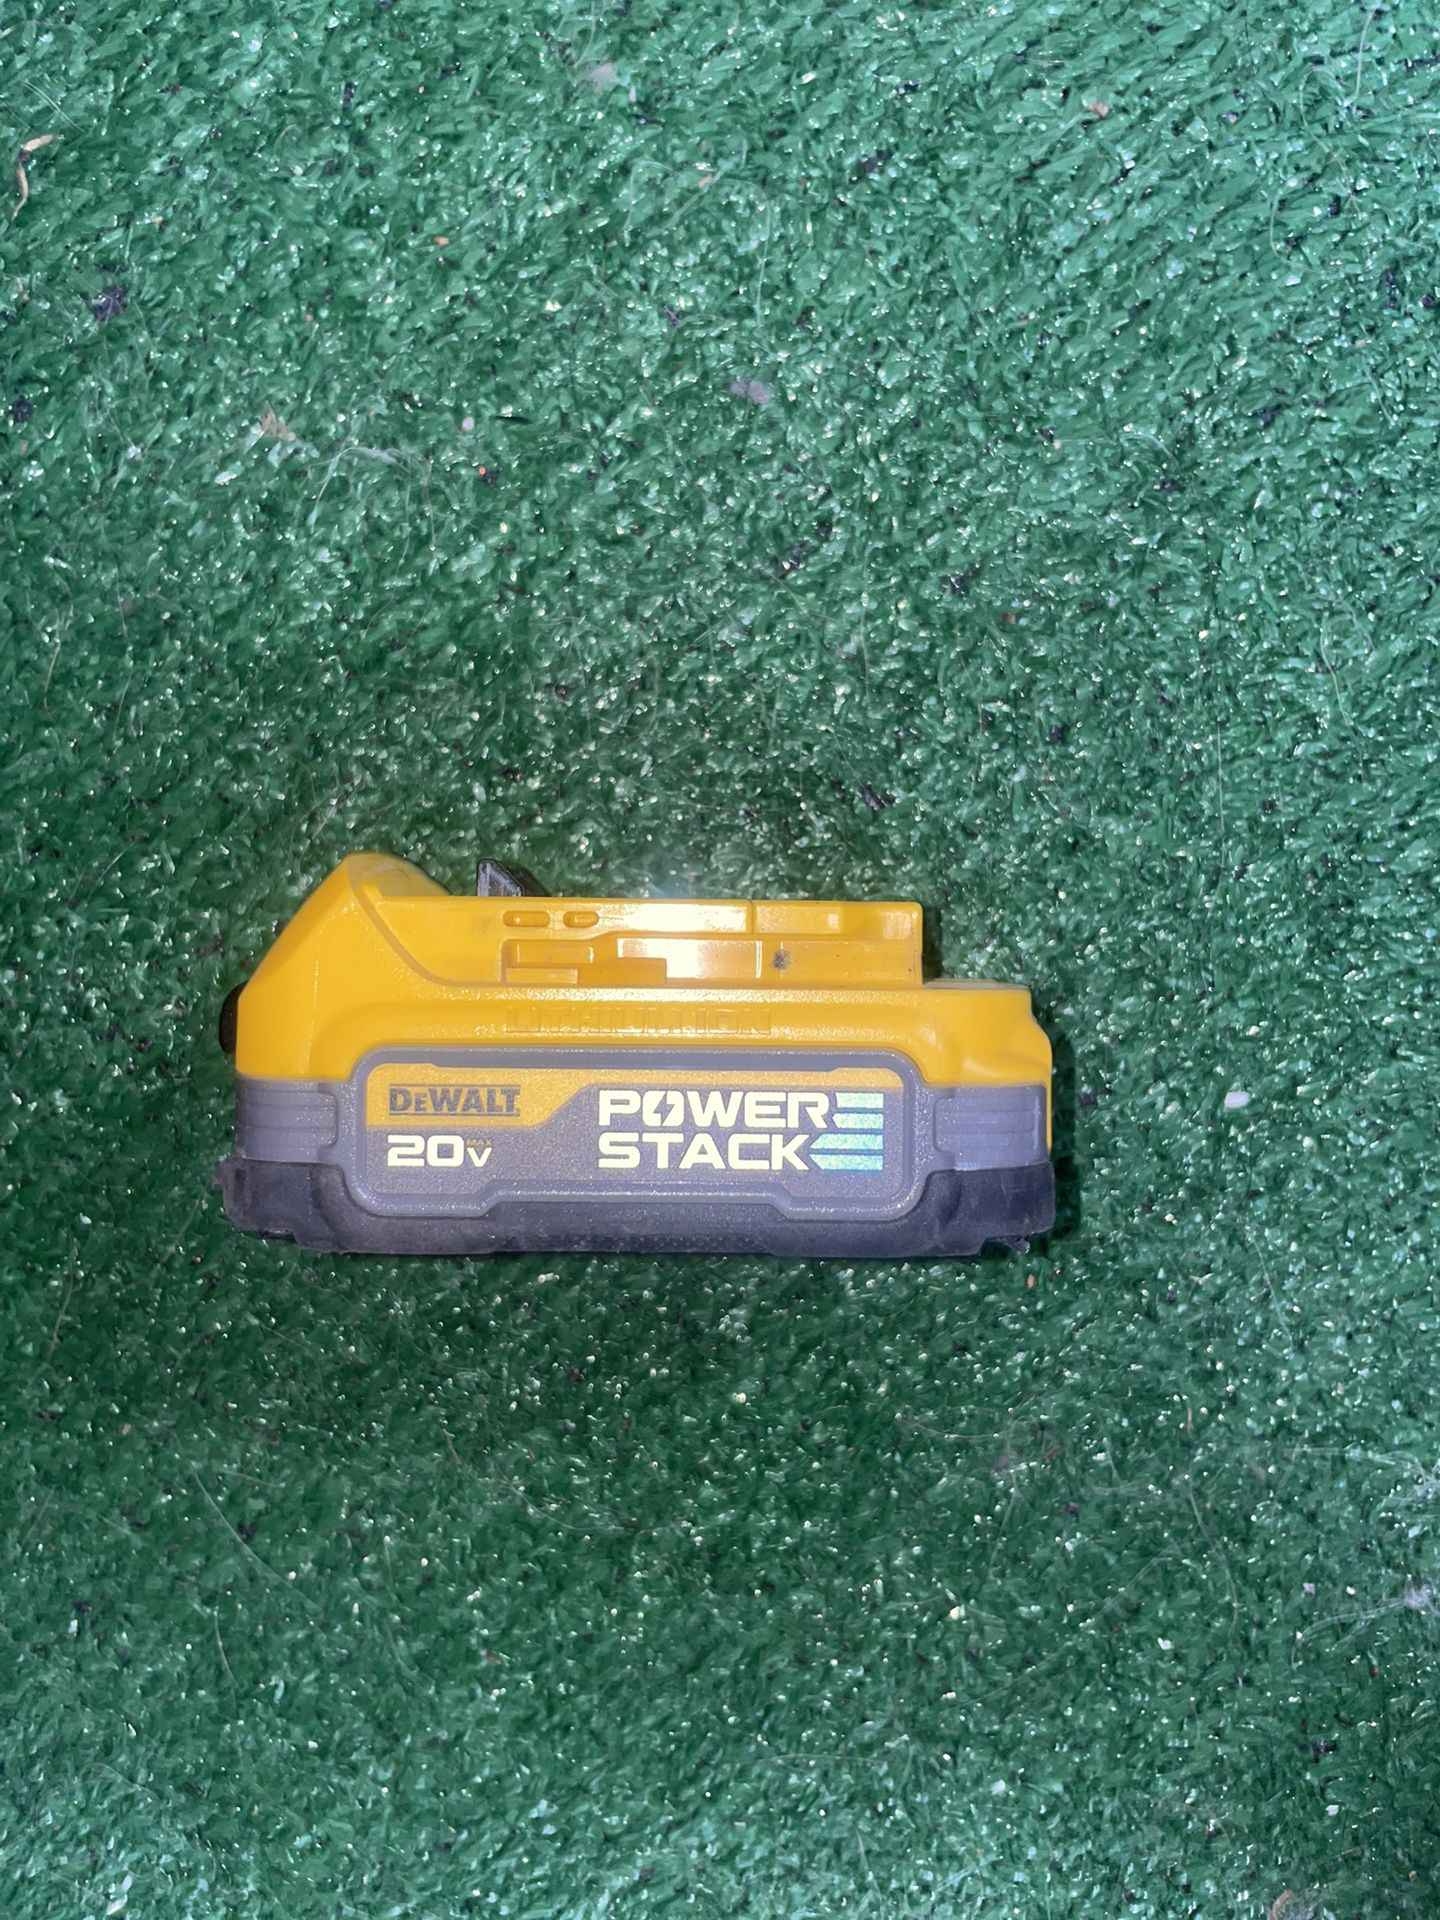 DEWALT 20V MAX POWERSTACK Compact Battery  About This Product Introducing THE NEXT DIMENSION IN POWER with the 20V MAX DEWALT POWERSTACK Compact Batte